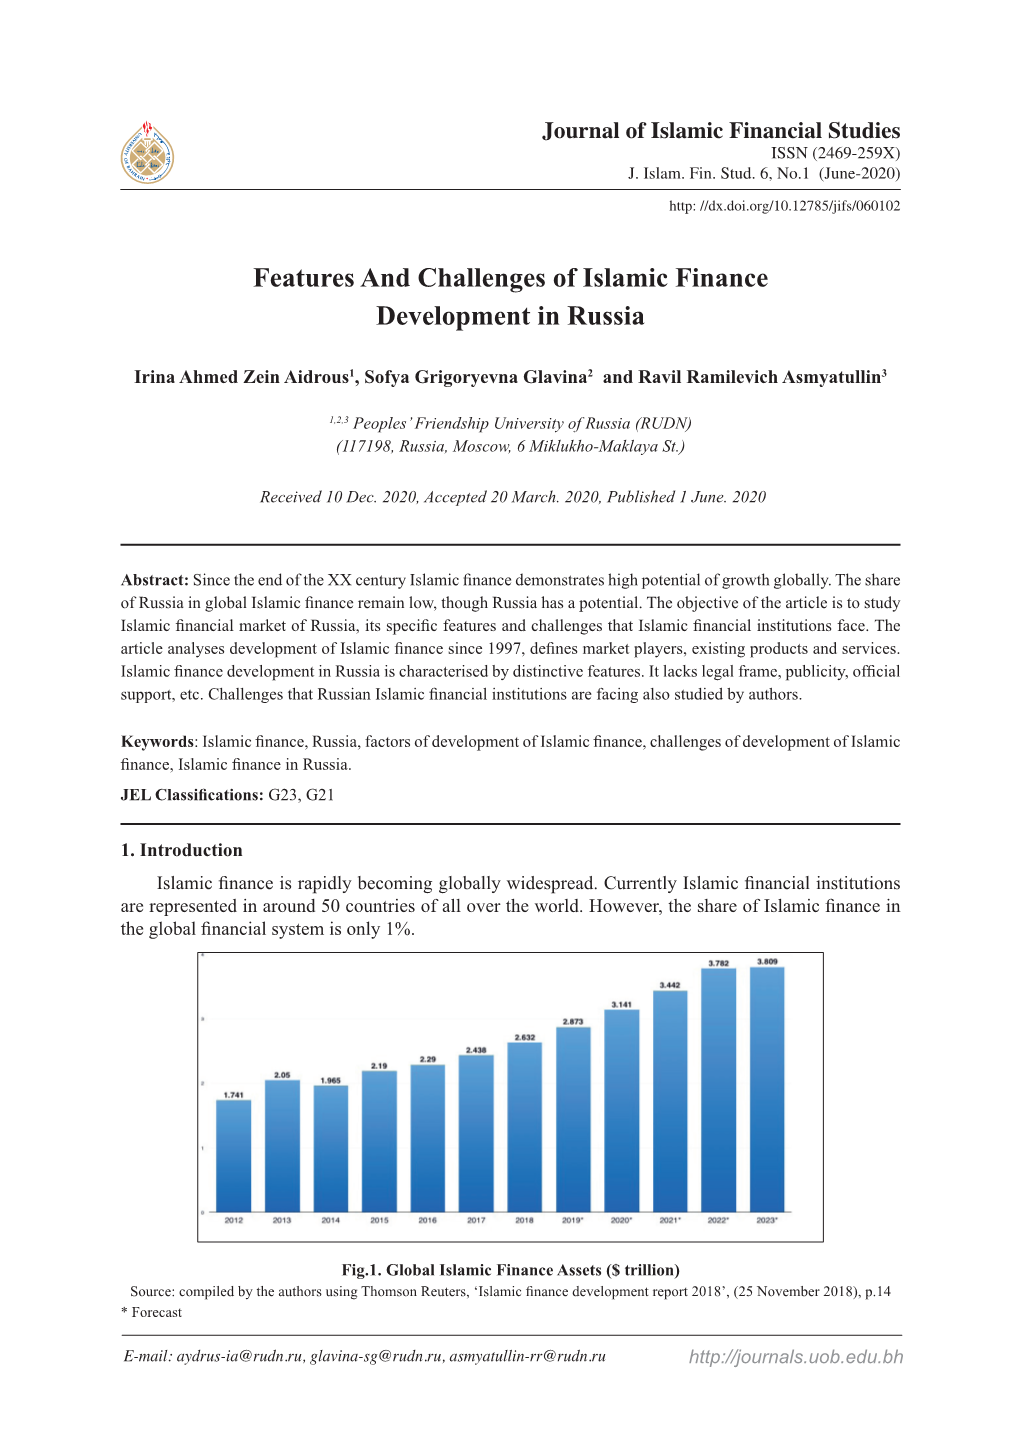 Features and Challenges of Islamic Finance Development in Russia